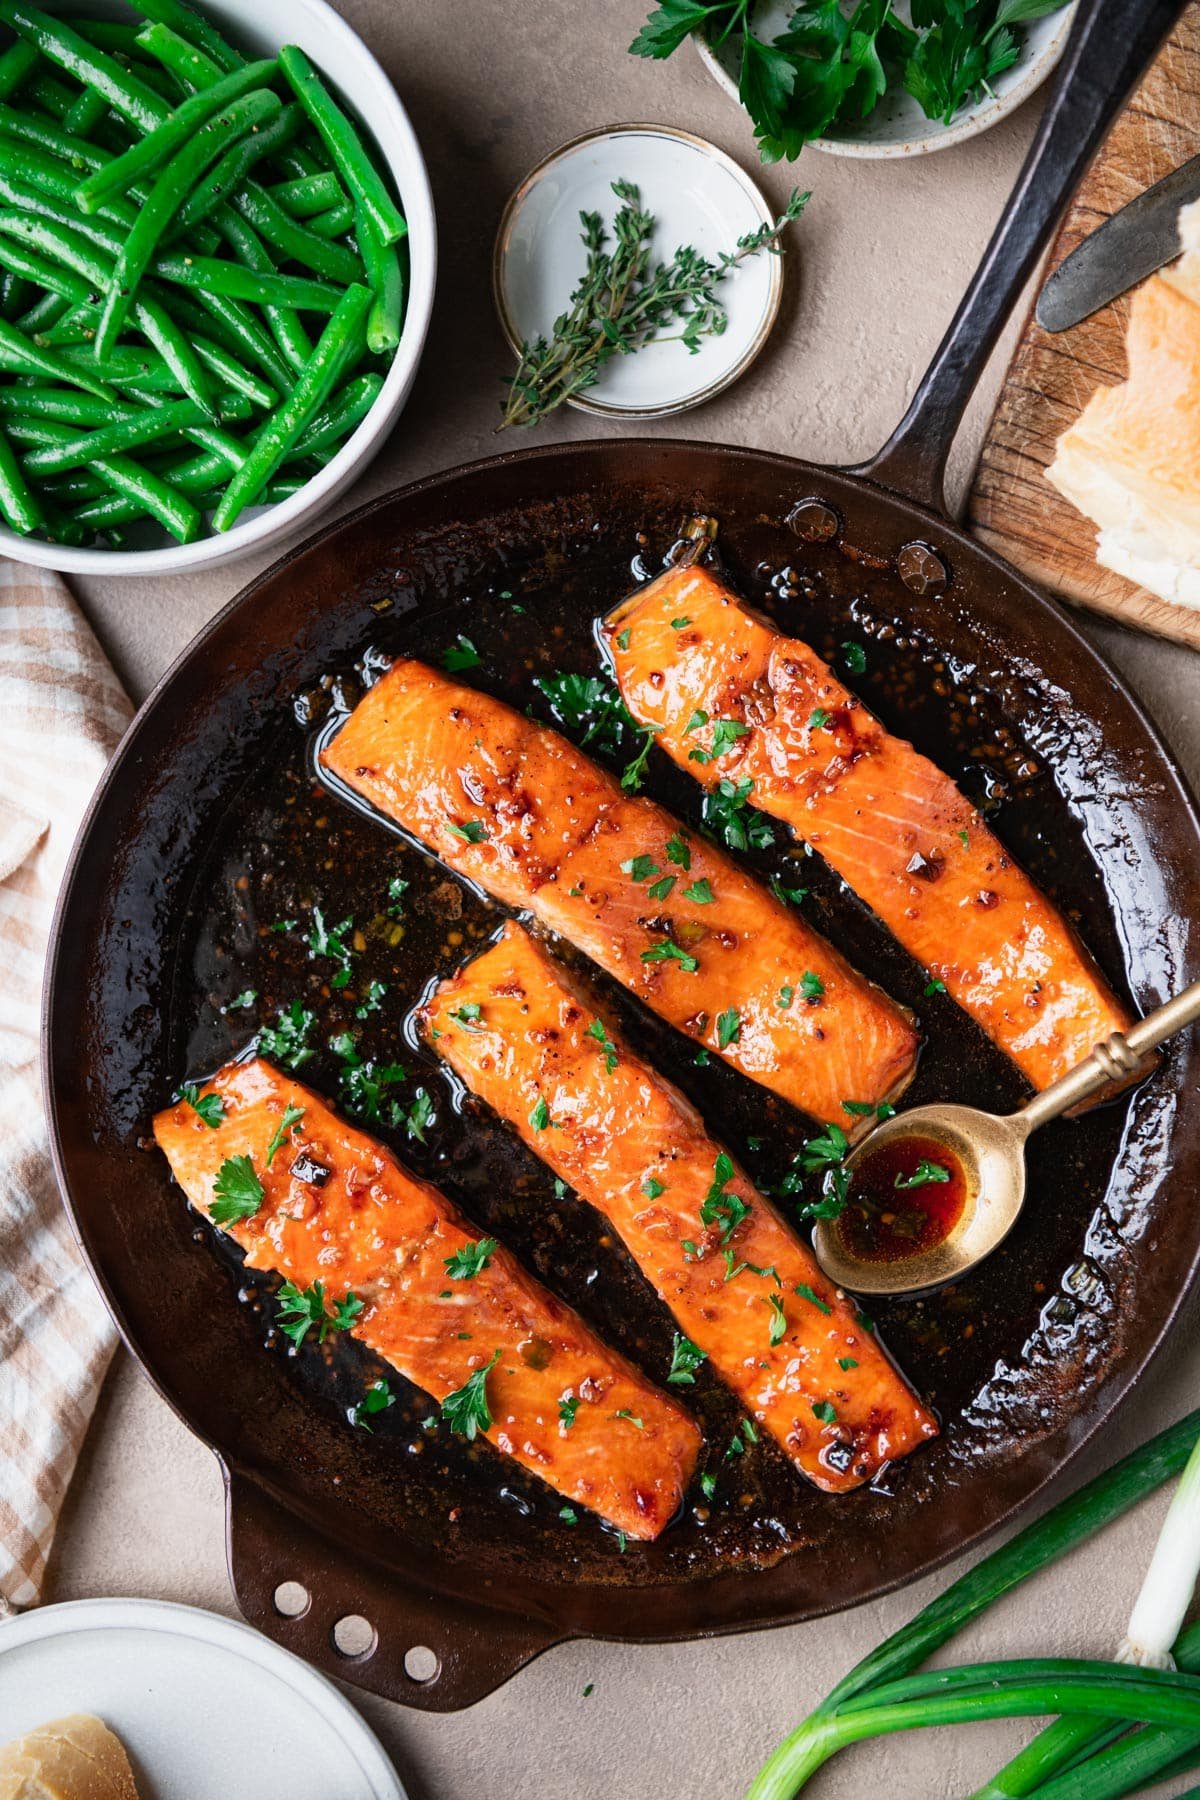 Overhead image of bourbon glazed salmon with a side of green beans and bread.